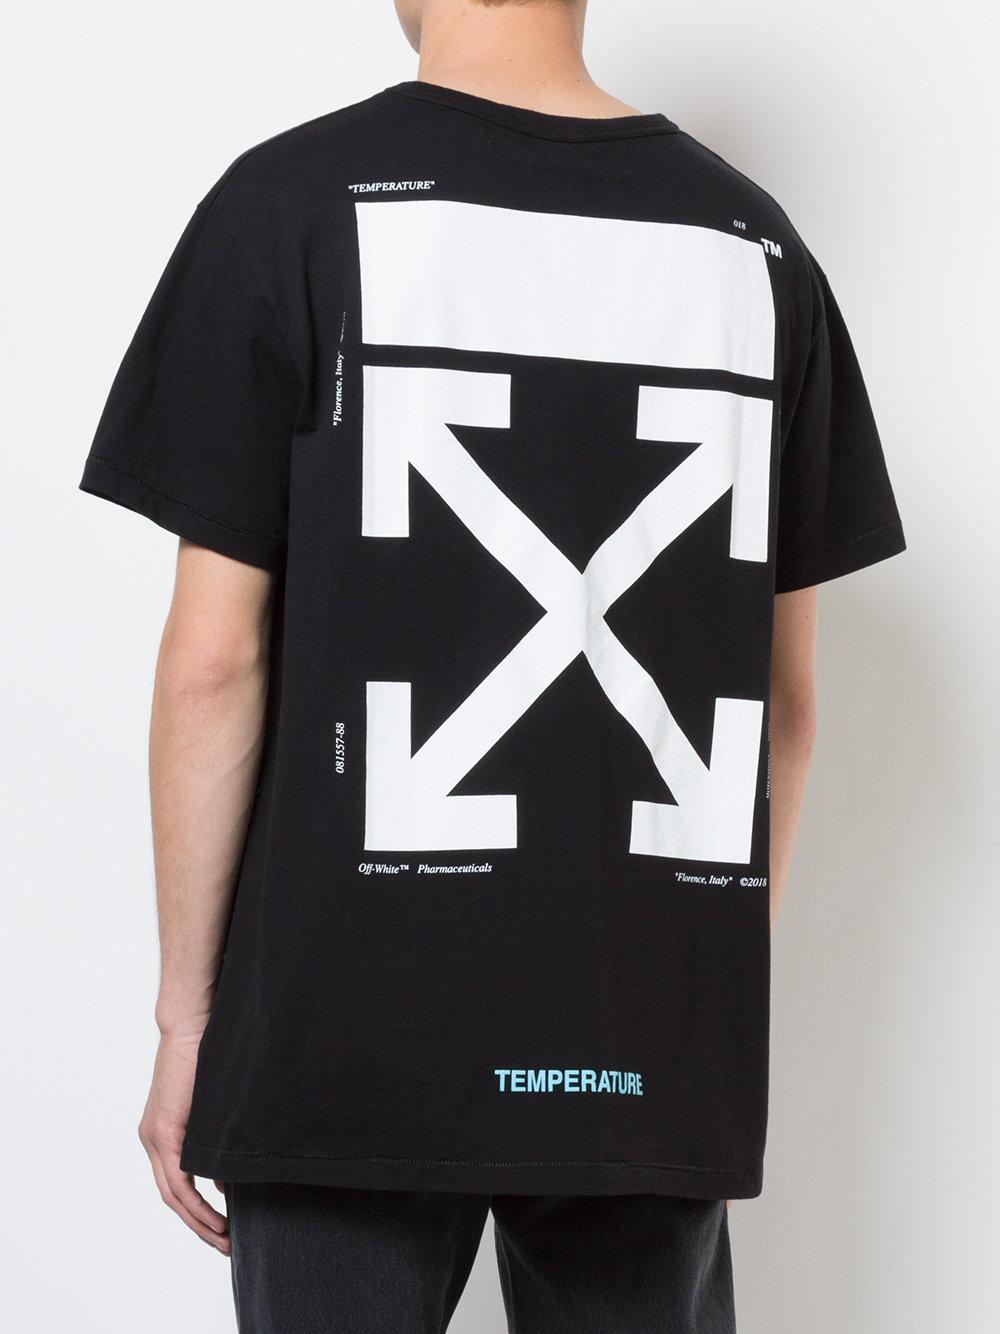 Lyst - Off-White c/o Virgil Abloh Temperature Arrows T-shirt in Black ...